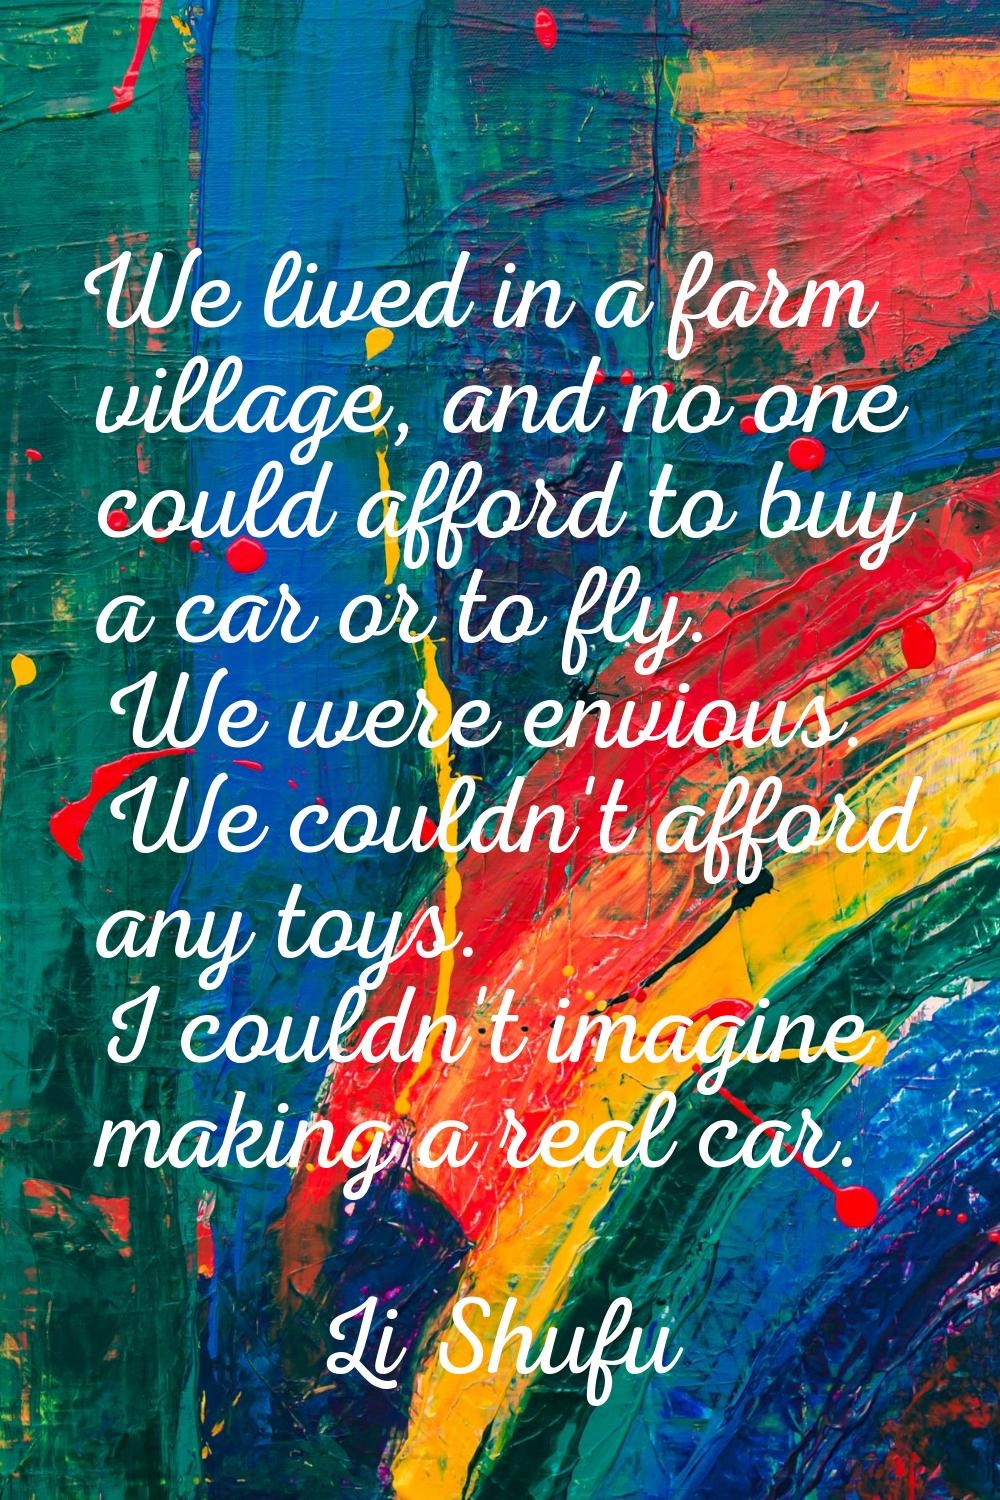 We lived in a farm village, and no one could afford to buy a car or to fly. We were envious. We cou